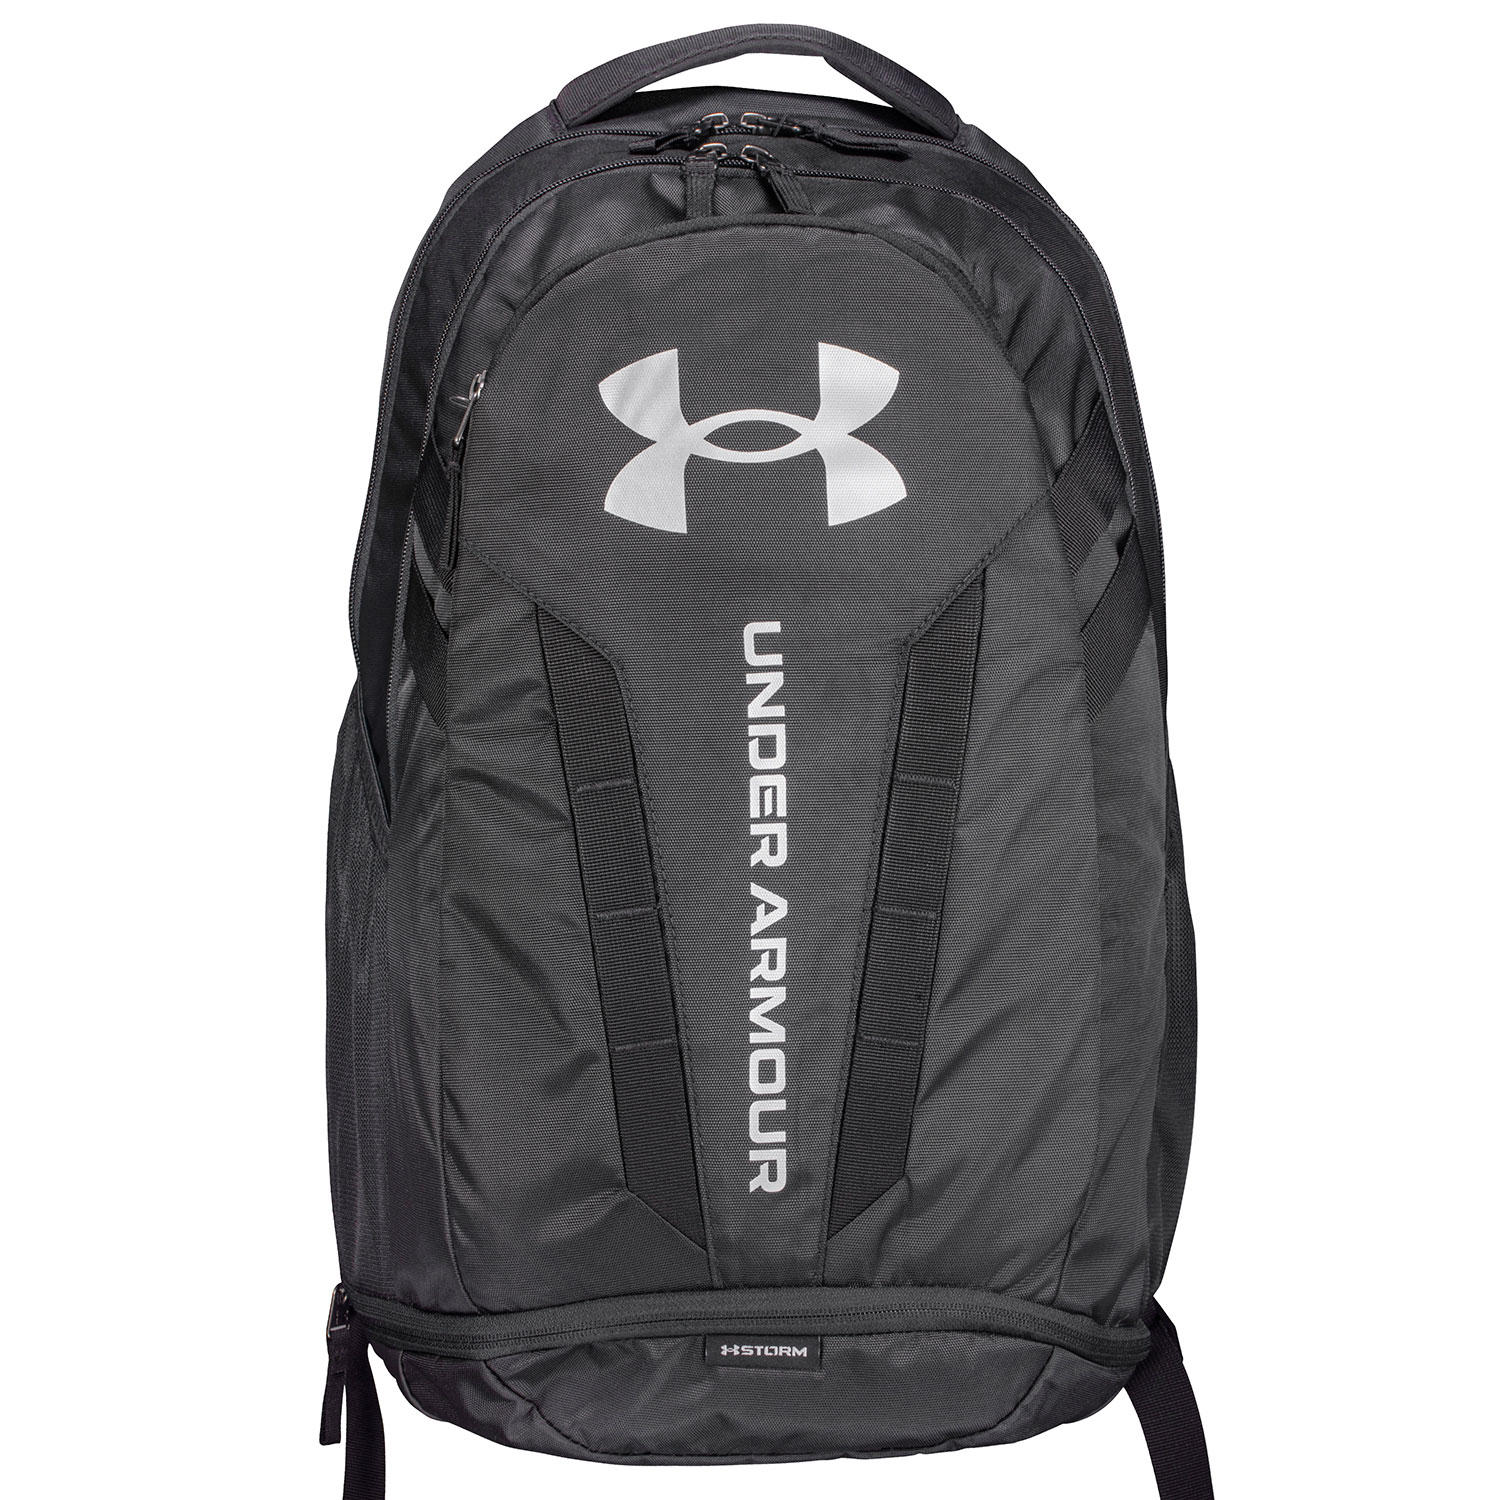 Under Armour UA Hustle 5.0 Backpack (various colors) $27 + FS for Sam's Club Plus Members